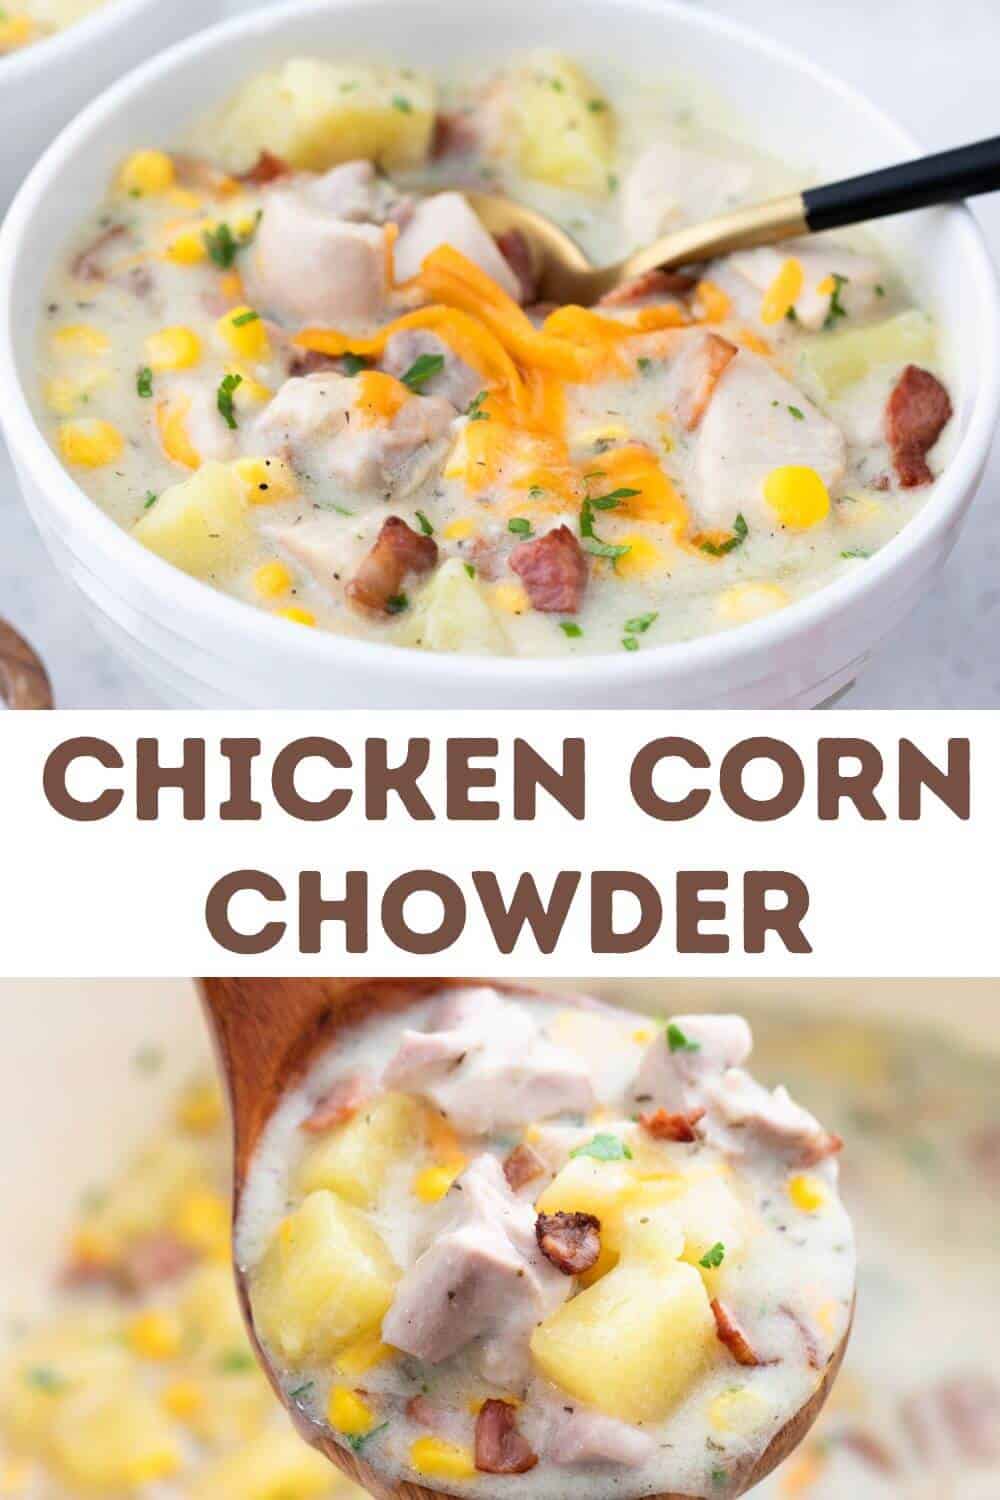 Chicken corn chowder in a bowl with a spoon.